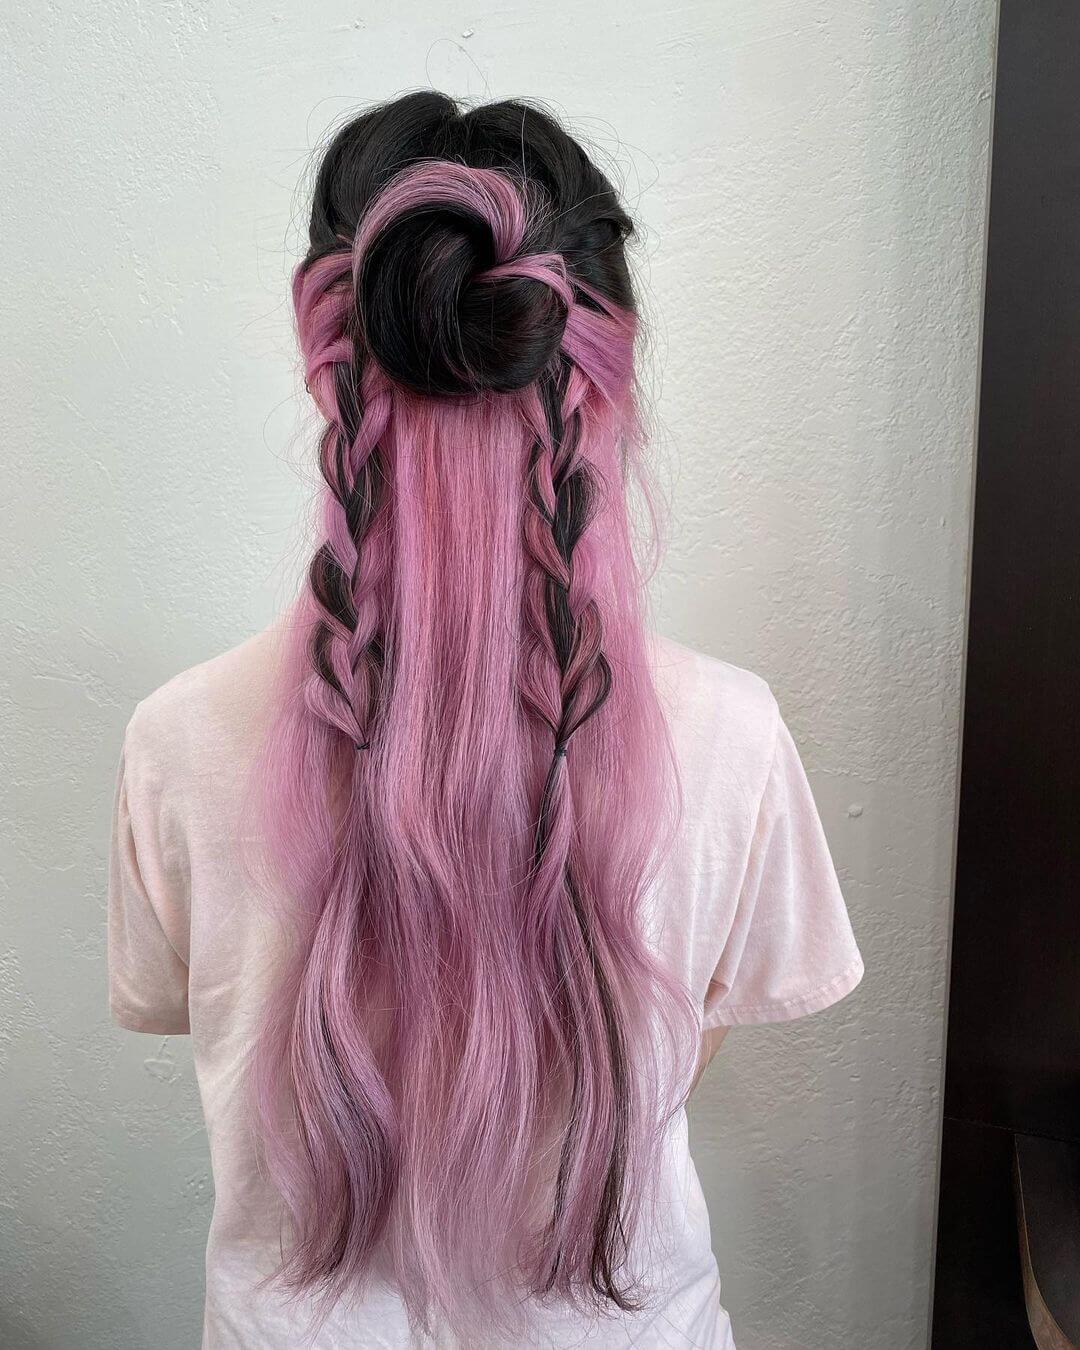 Pink Dyed Hair with Unique Braided Style